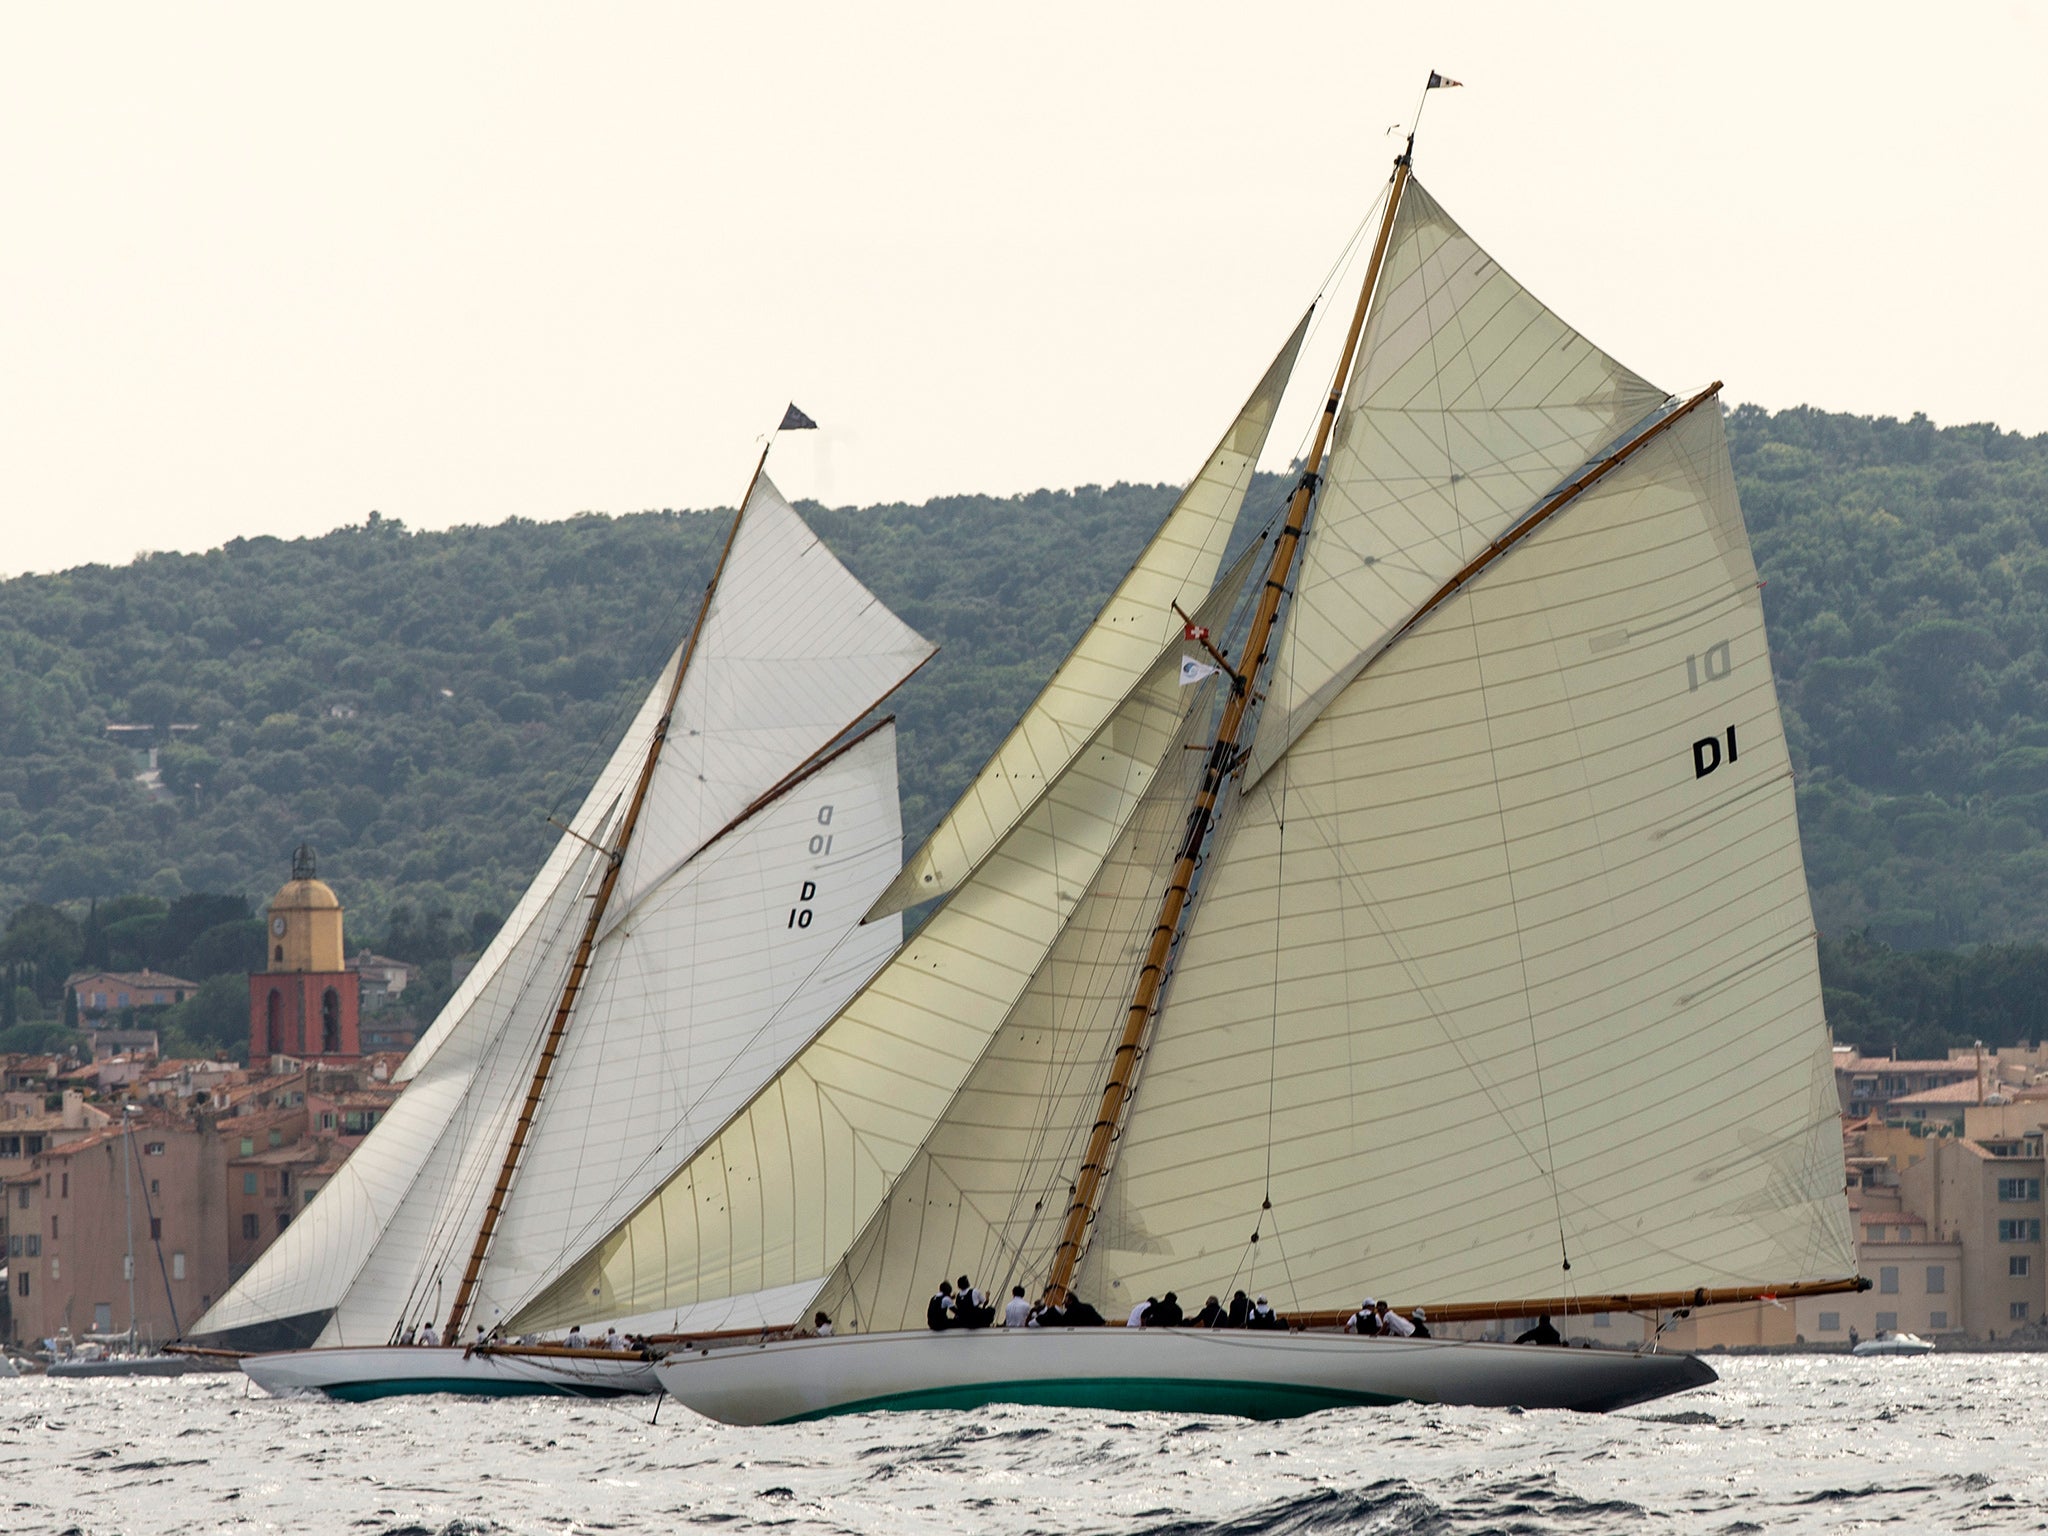 Both over 100 years old and both designed by William Fife, the 1912 The lady Anne (left) and the 1908 Mariska race in the Voiles de St. Tropez